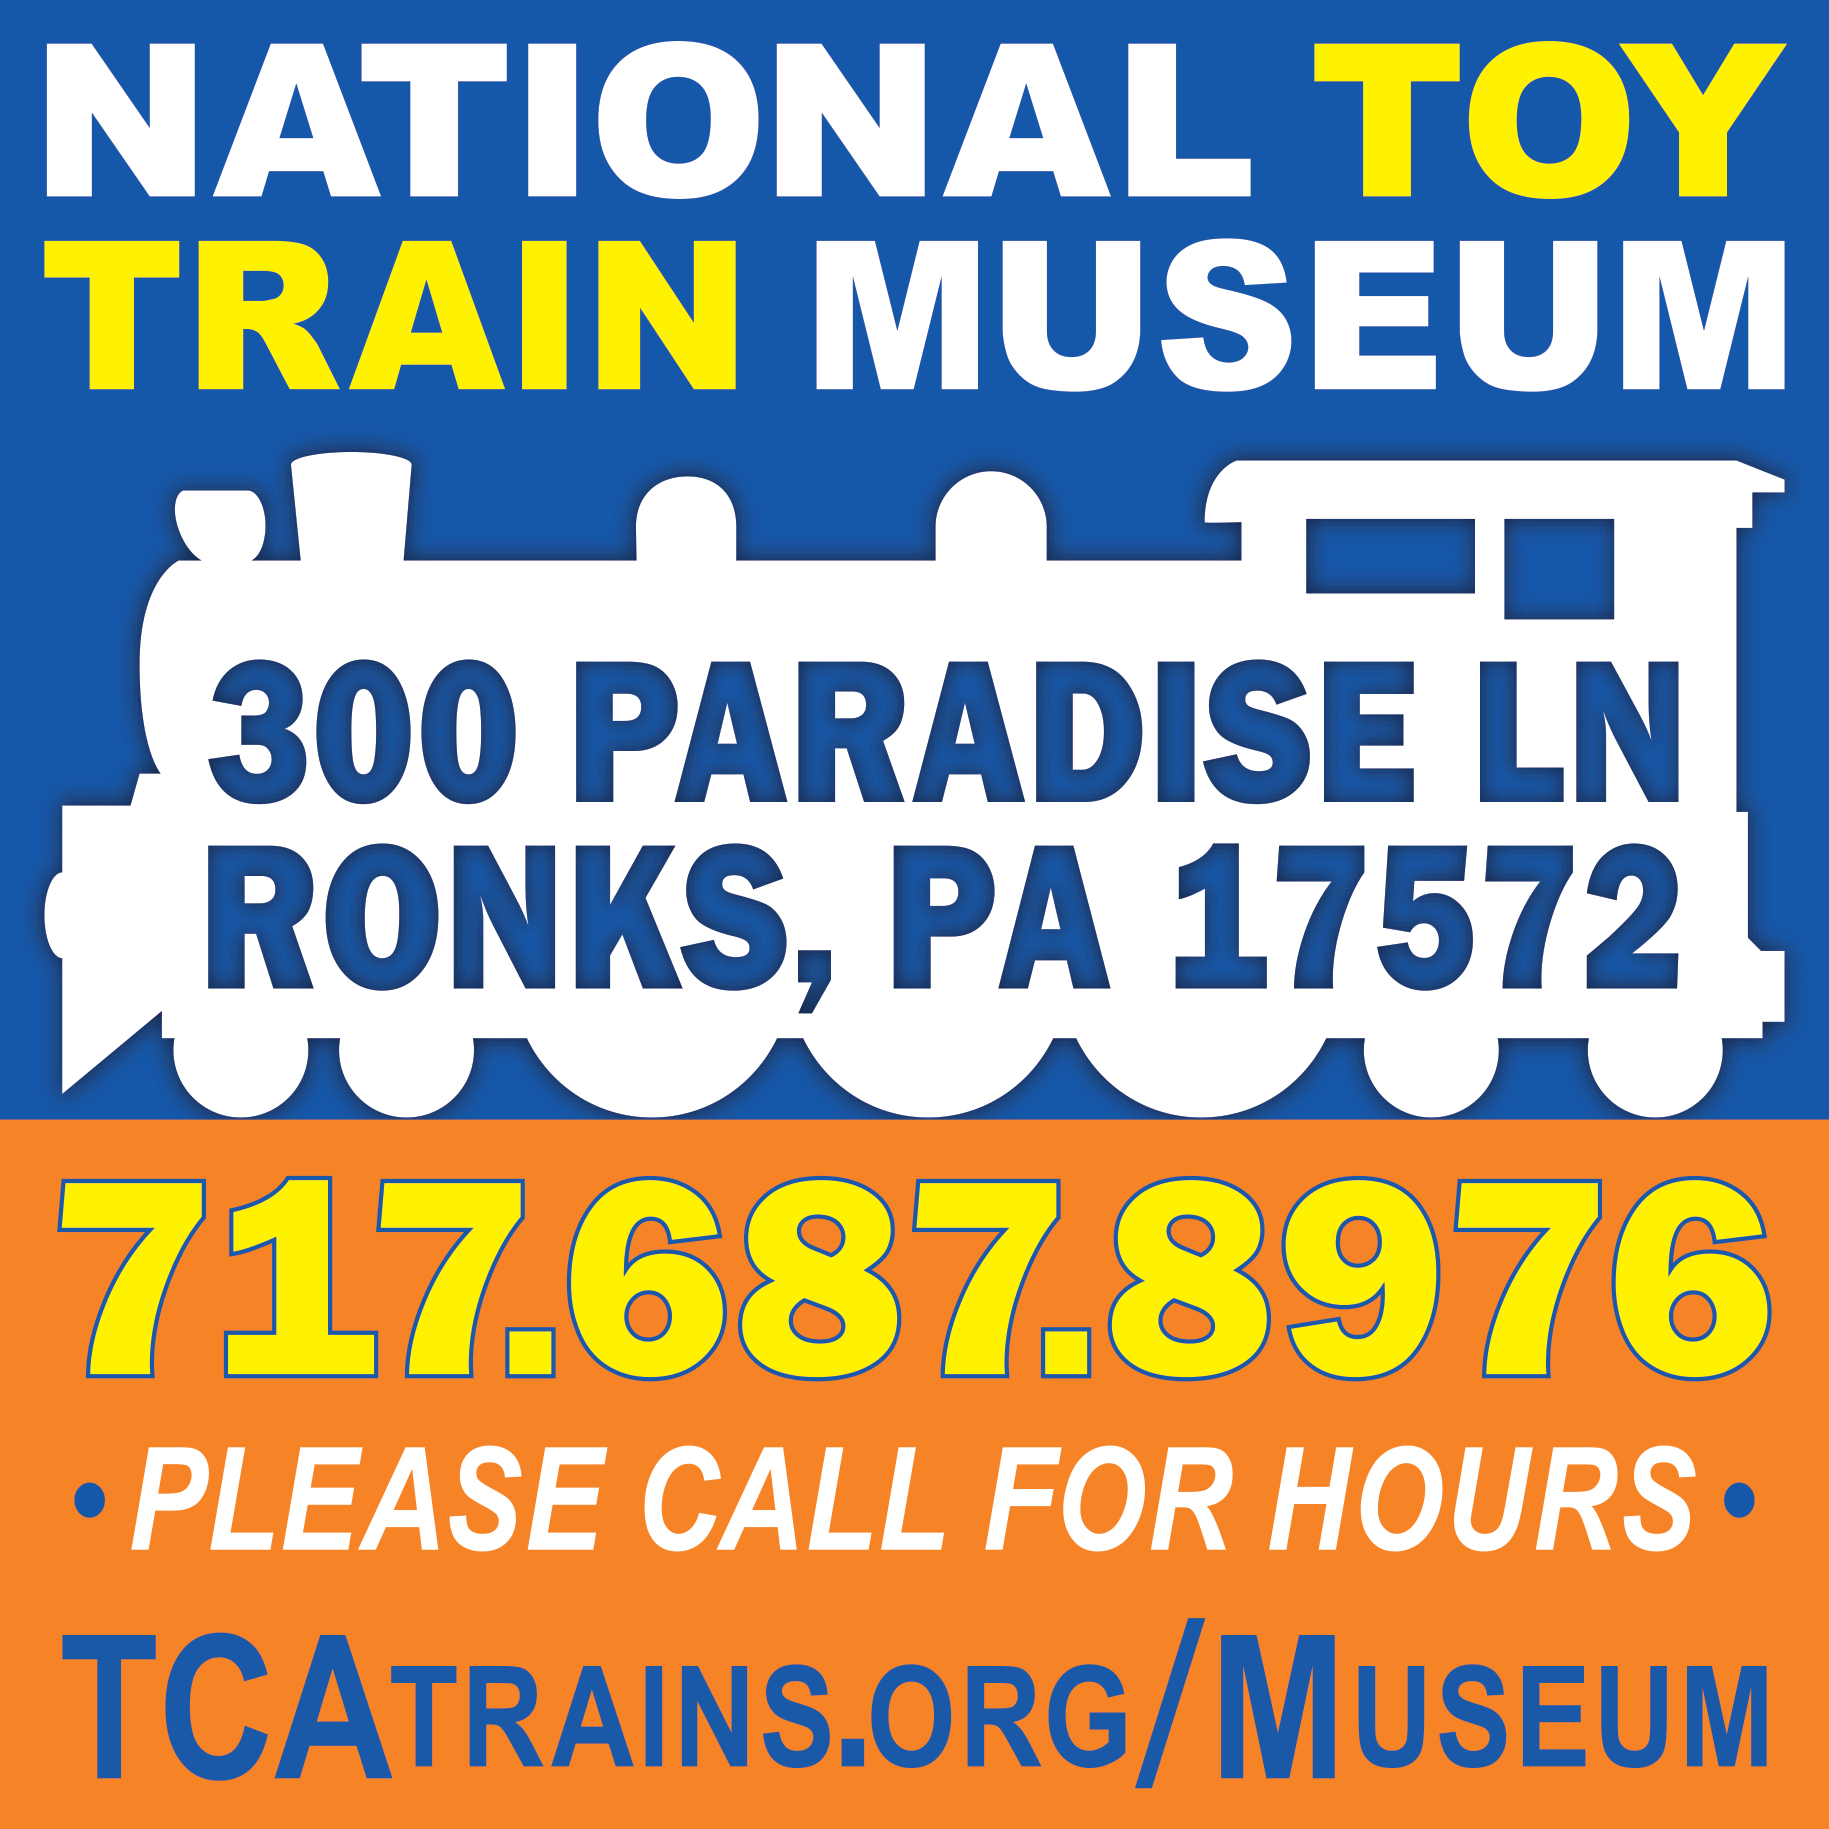 National Toy Train Museum Print Ad